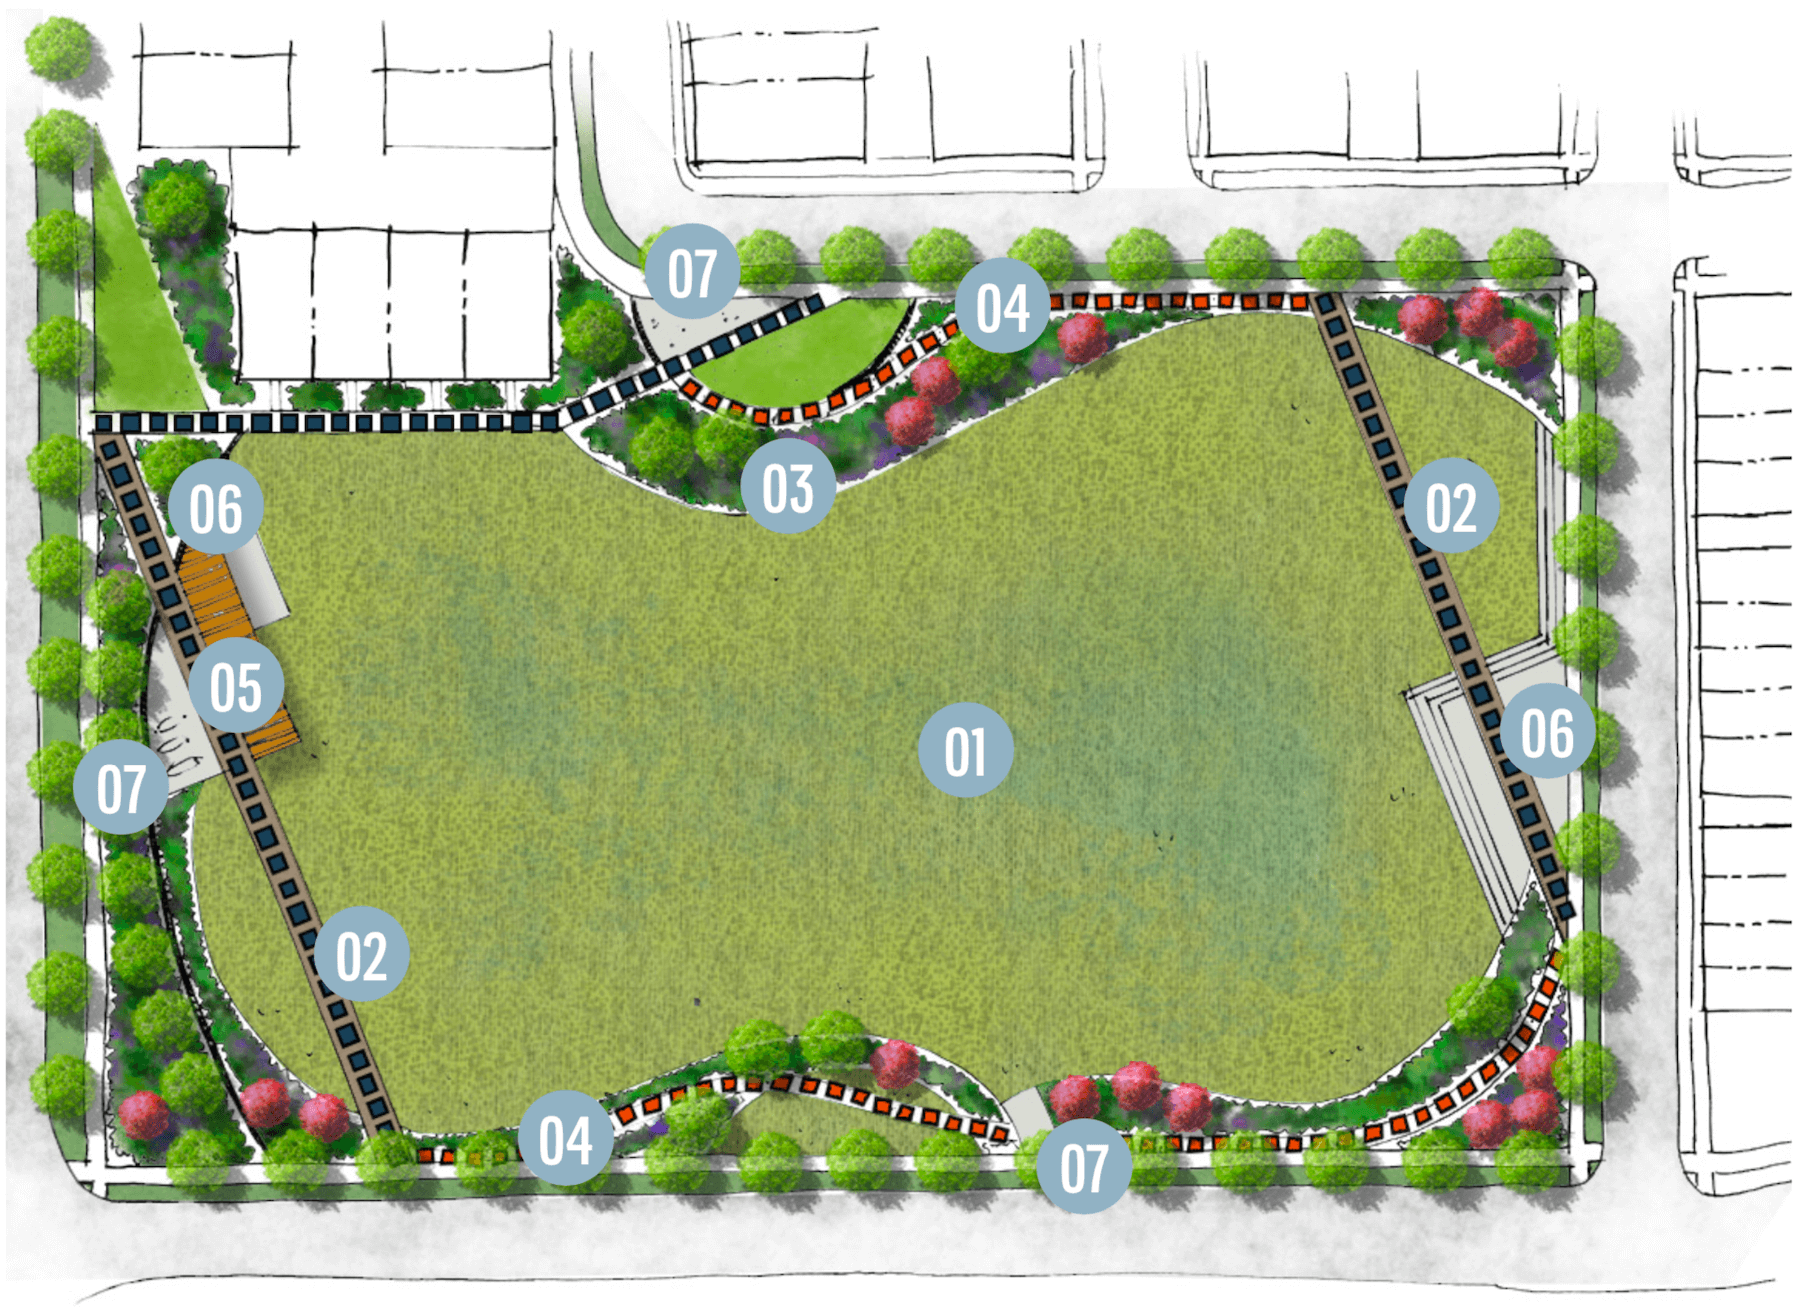 drawing of the meadow layout